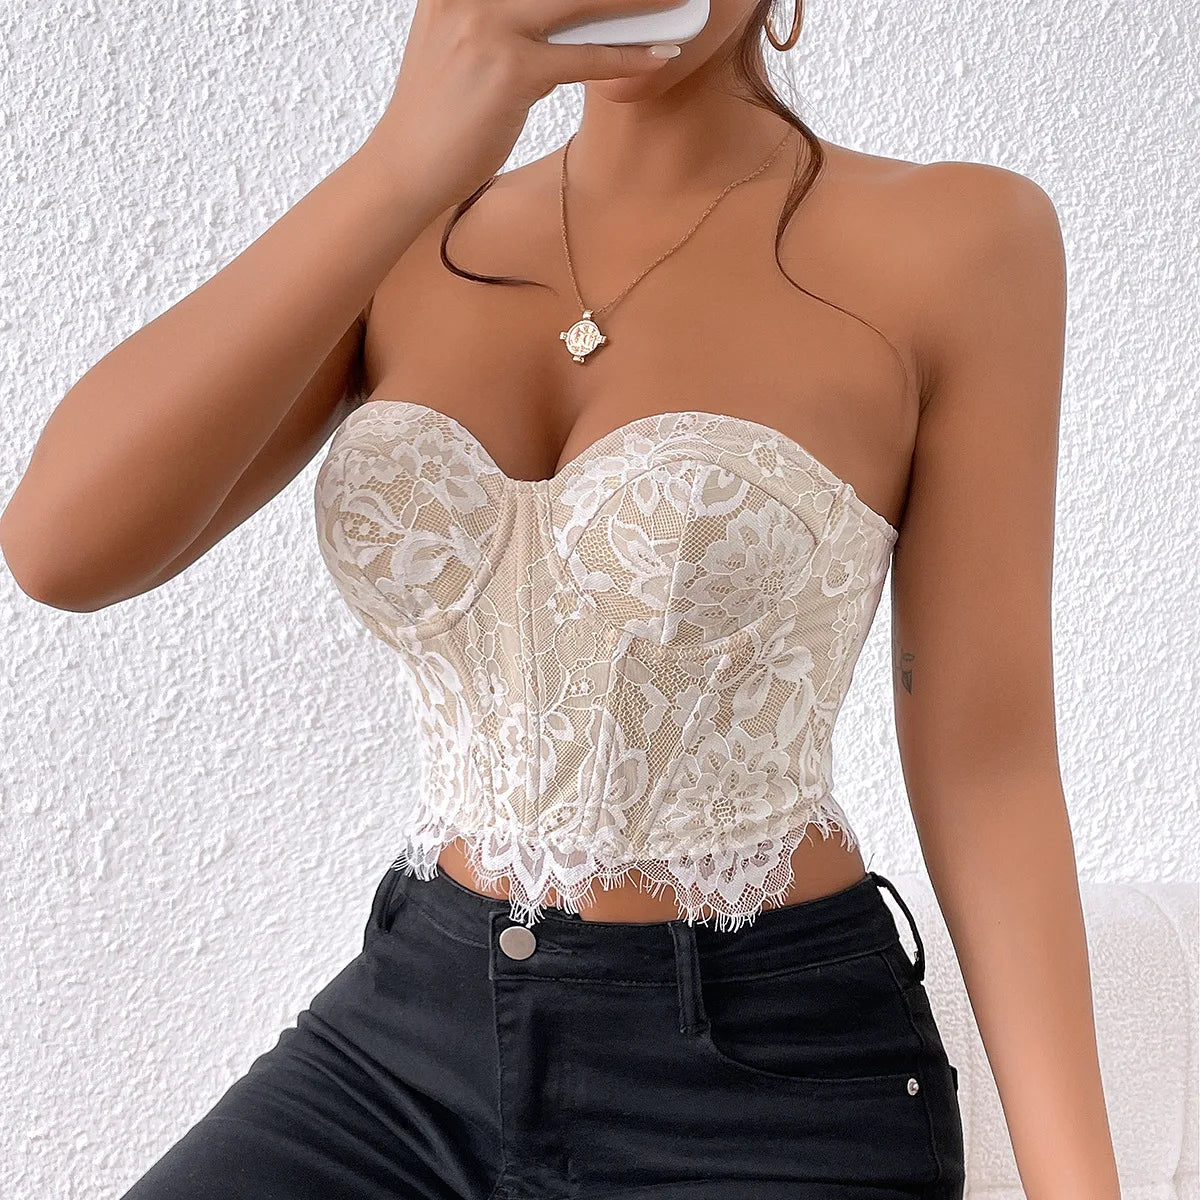 Vemina Sexy Lace Sleeveless Bare Shoulder Crop Top,Embroidery Floral Tube Top, Strapless Fishbone Corset Backless Camisole Vest